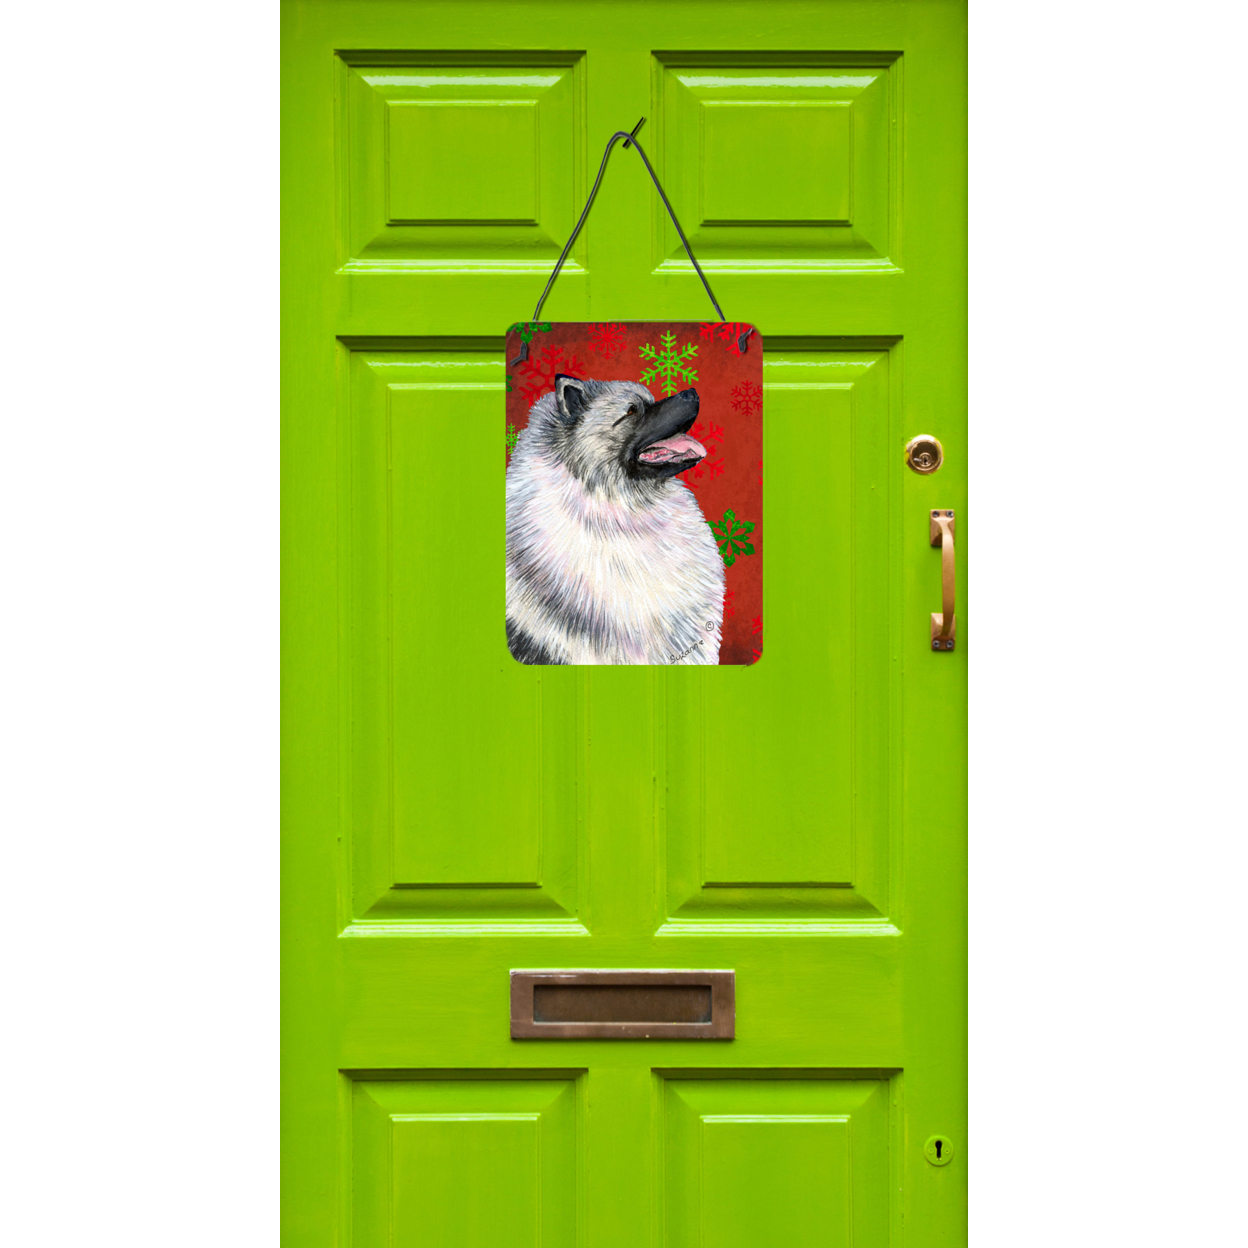 Keeshond Red and Green Snowflakes Holiday Christmas Wall or Door Hanging Prints - image 2 of 2